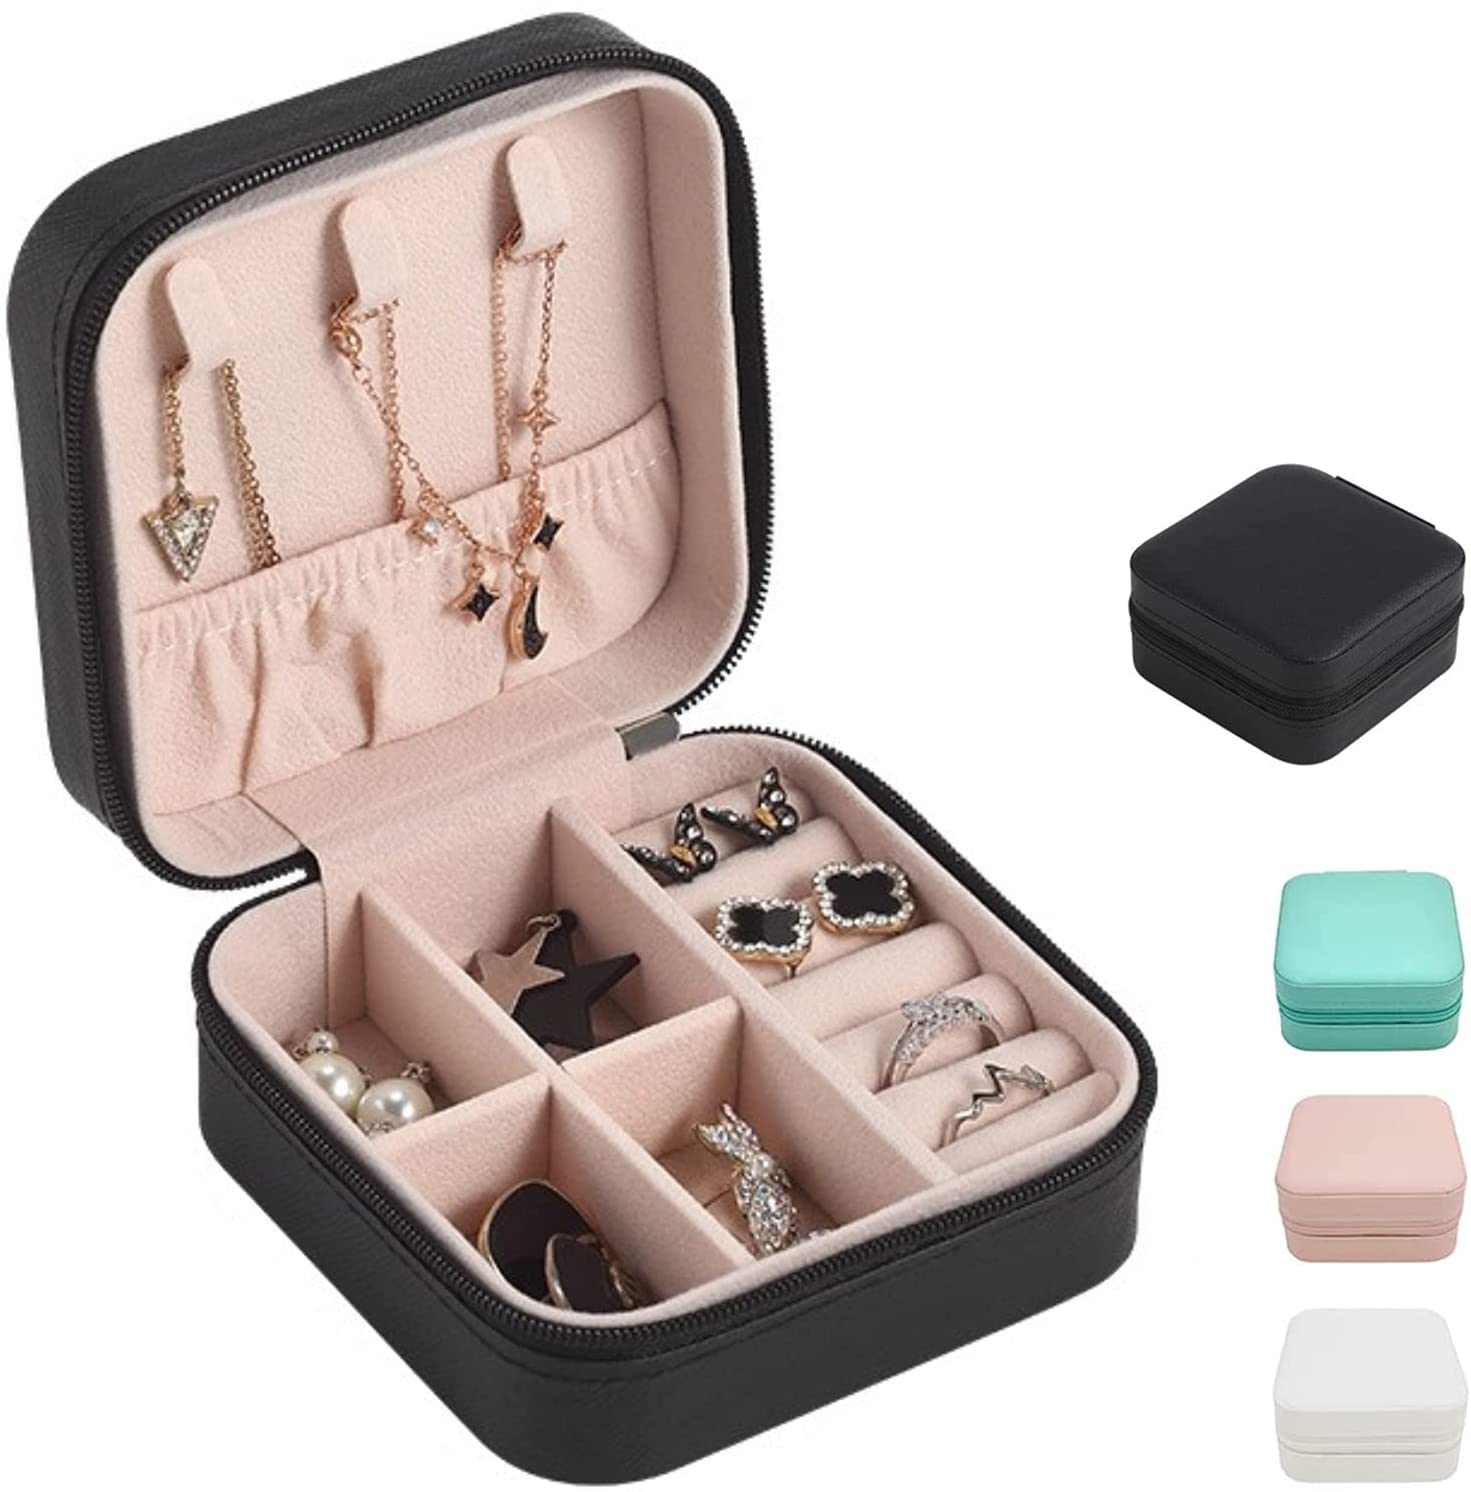 PU-Black Small Jewellry Organizer Portable Display Jewelry Storage Case for Rings Earrings Necklace Bracelet Bangle,Gifts for Girls Women VOMNA Mini Jewellry Case Travel Jewellry Box 